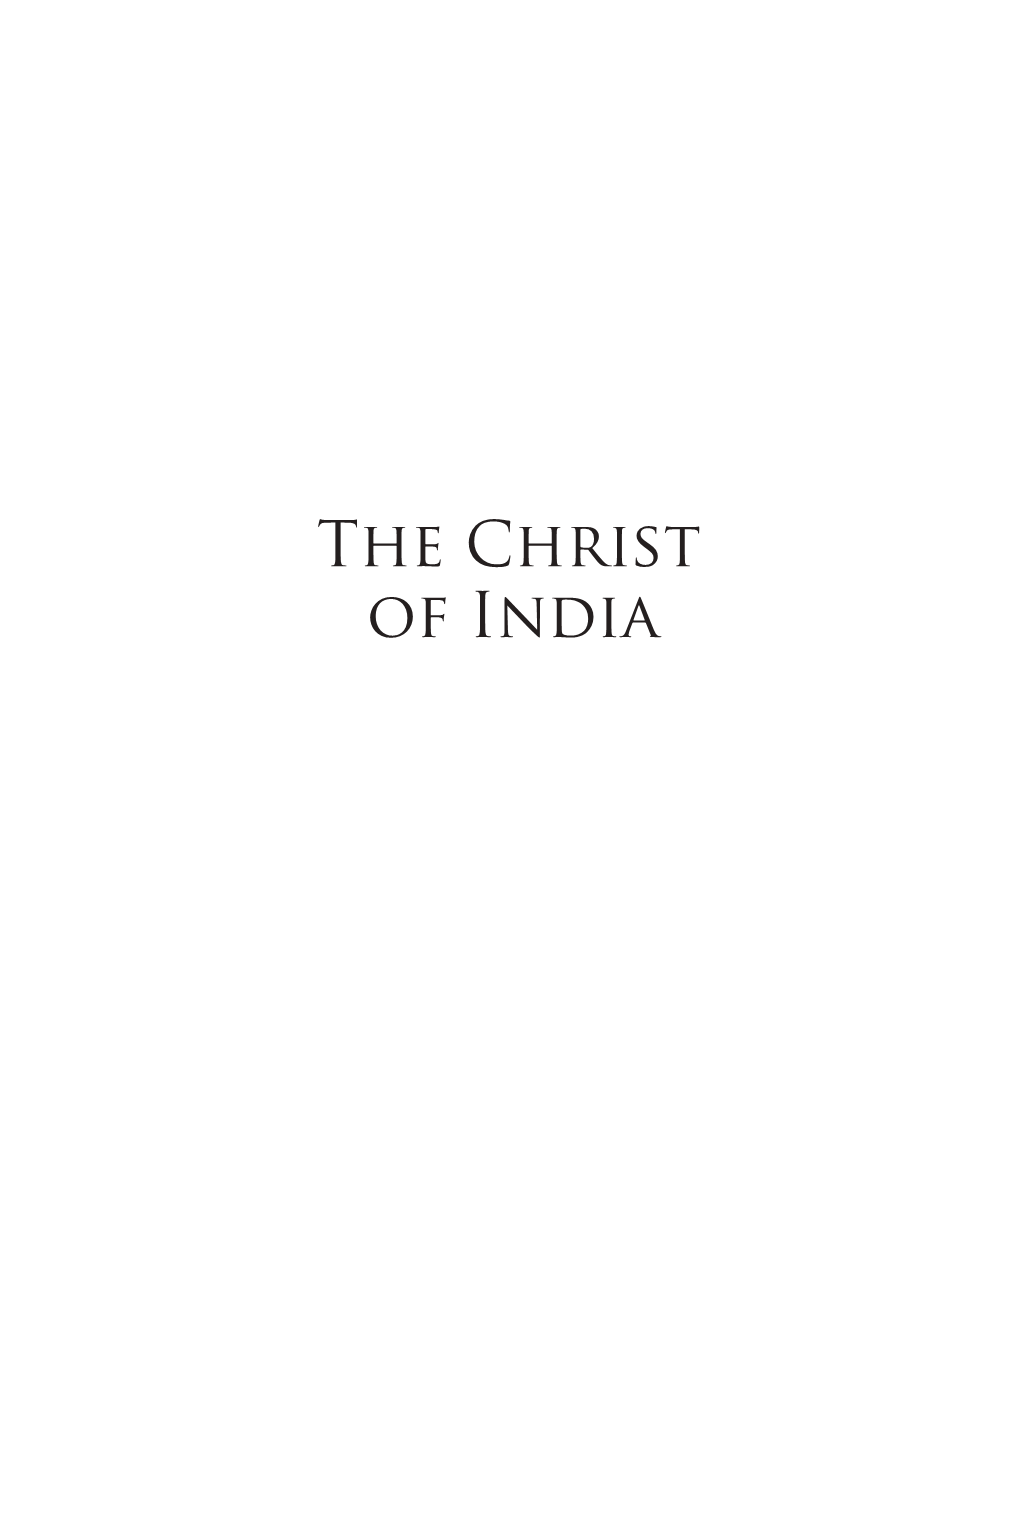 The Christ of India